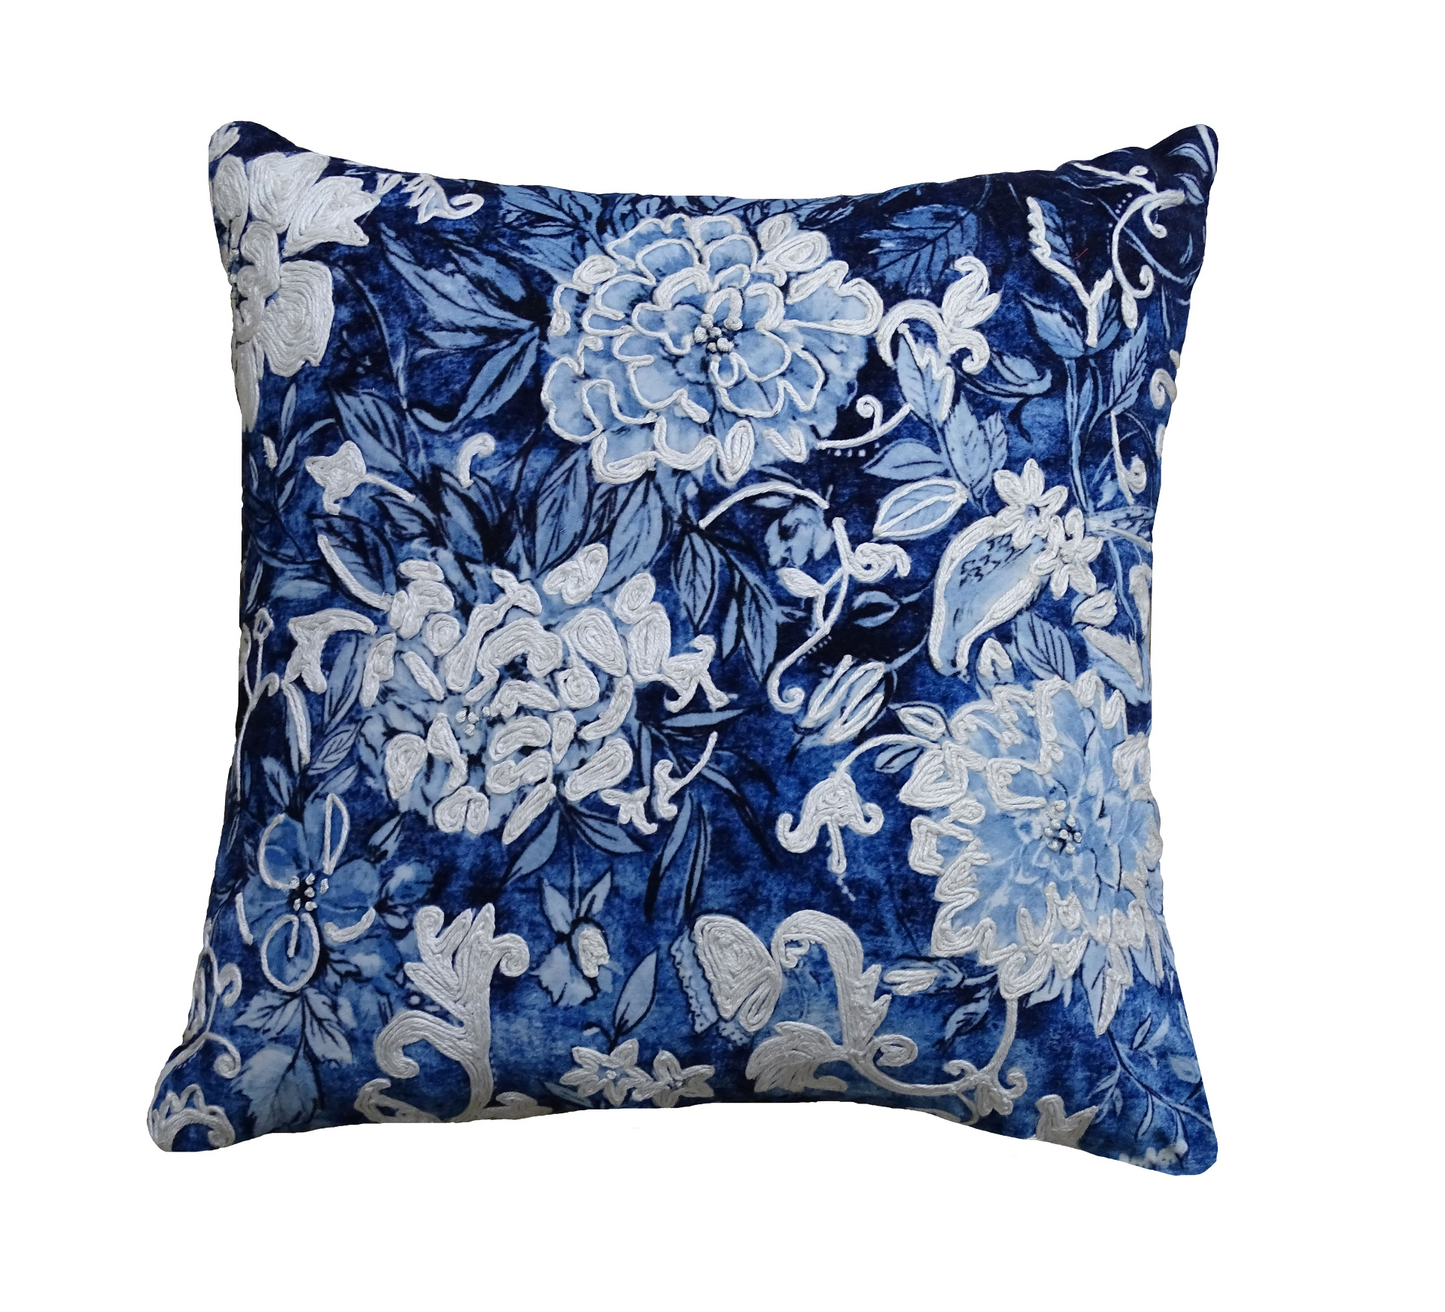 Decorative Throw Pillow Cover Fall Collection Blue & White